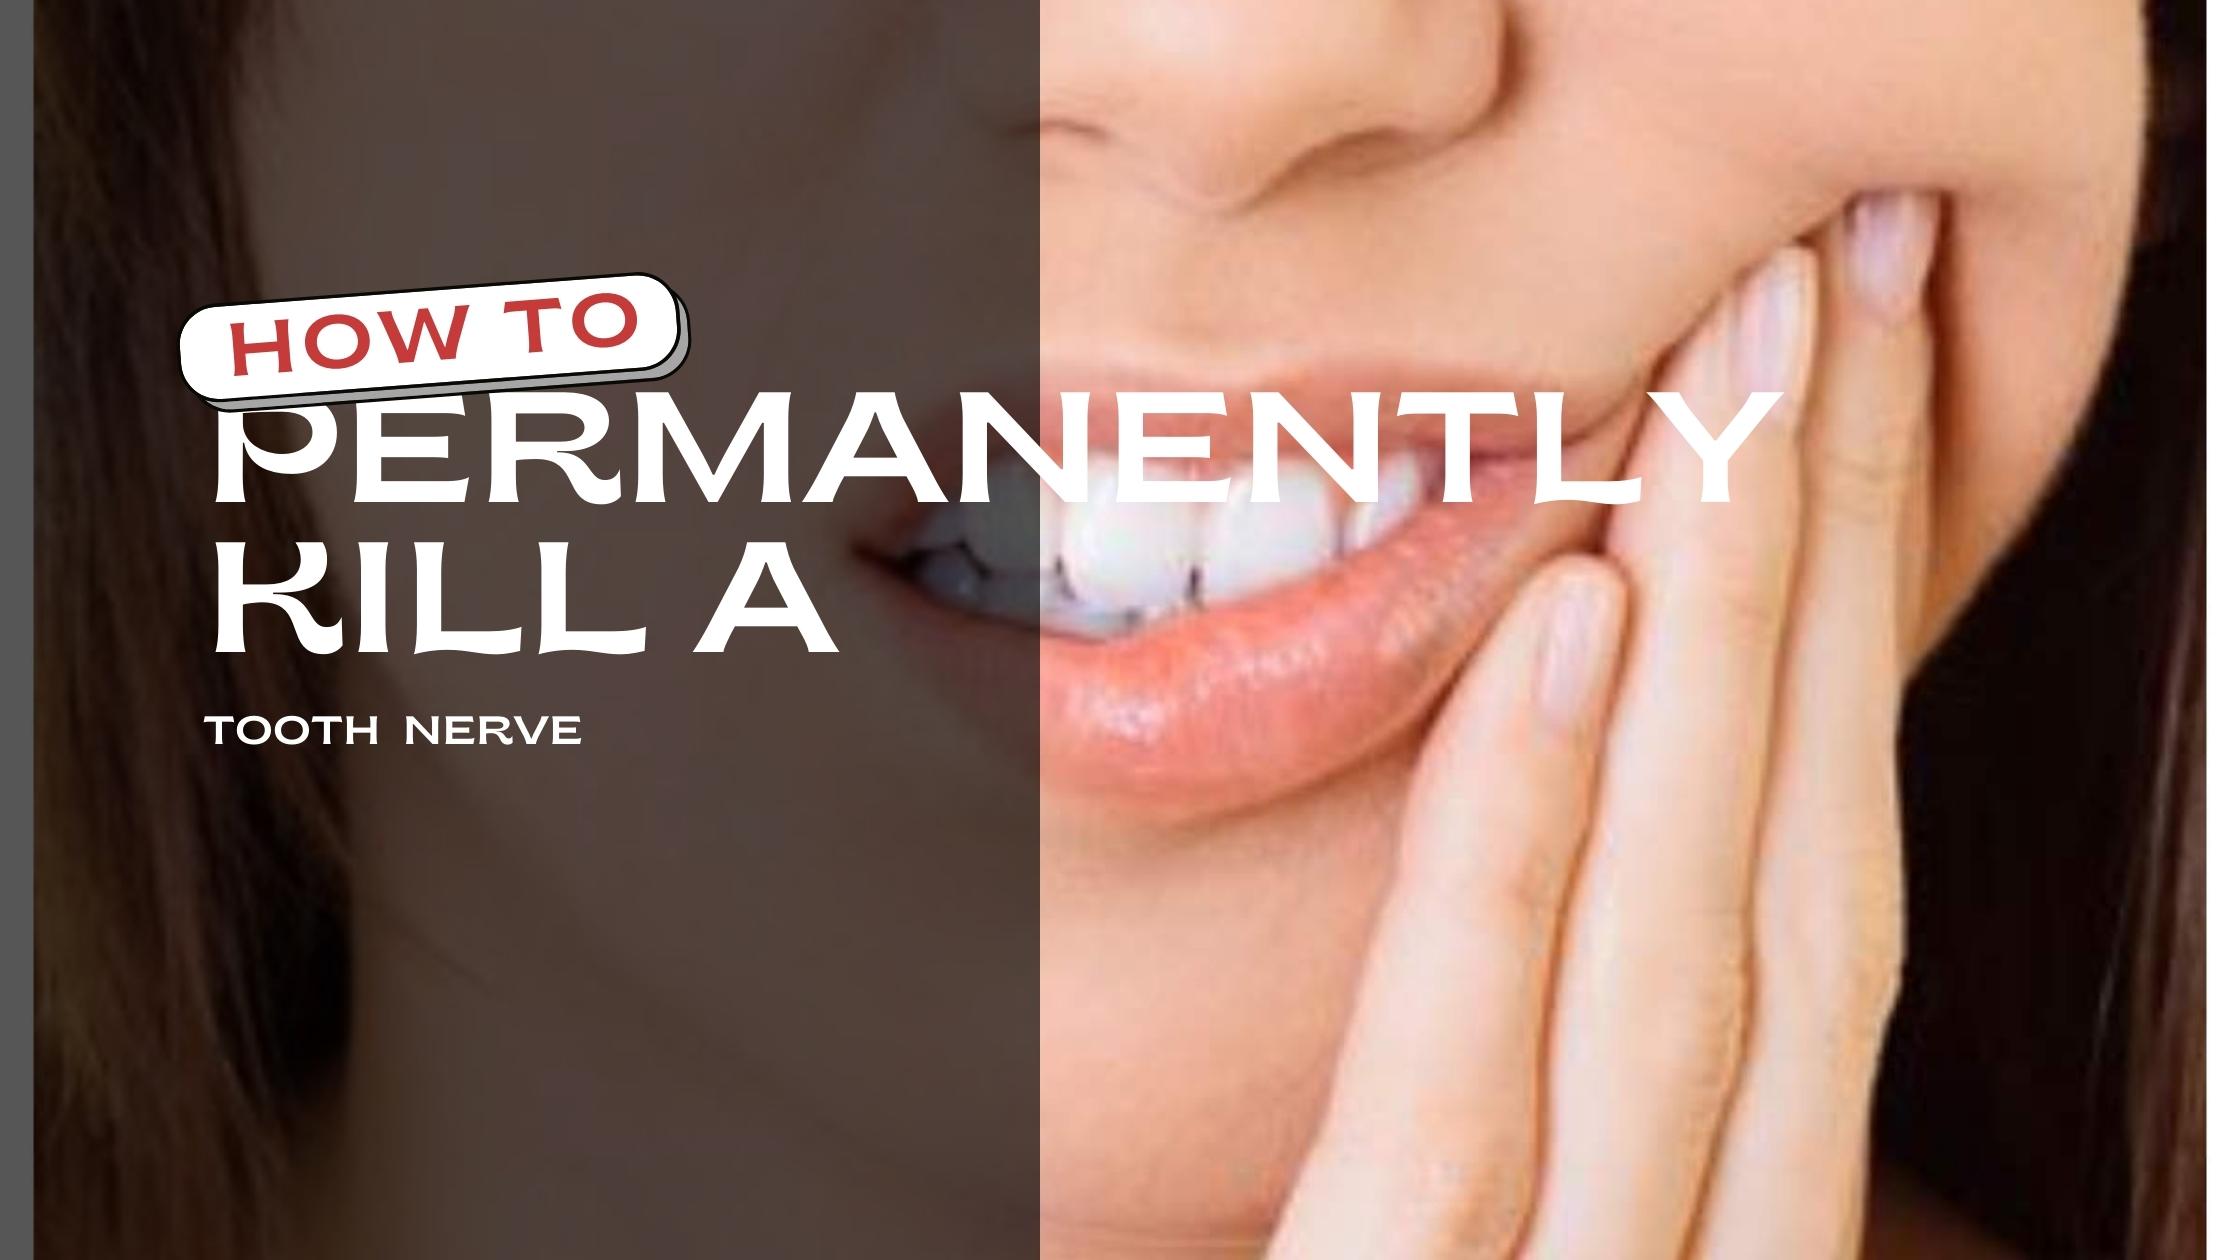 How To Permanently Kill A Tooth Nerve